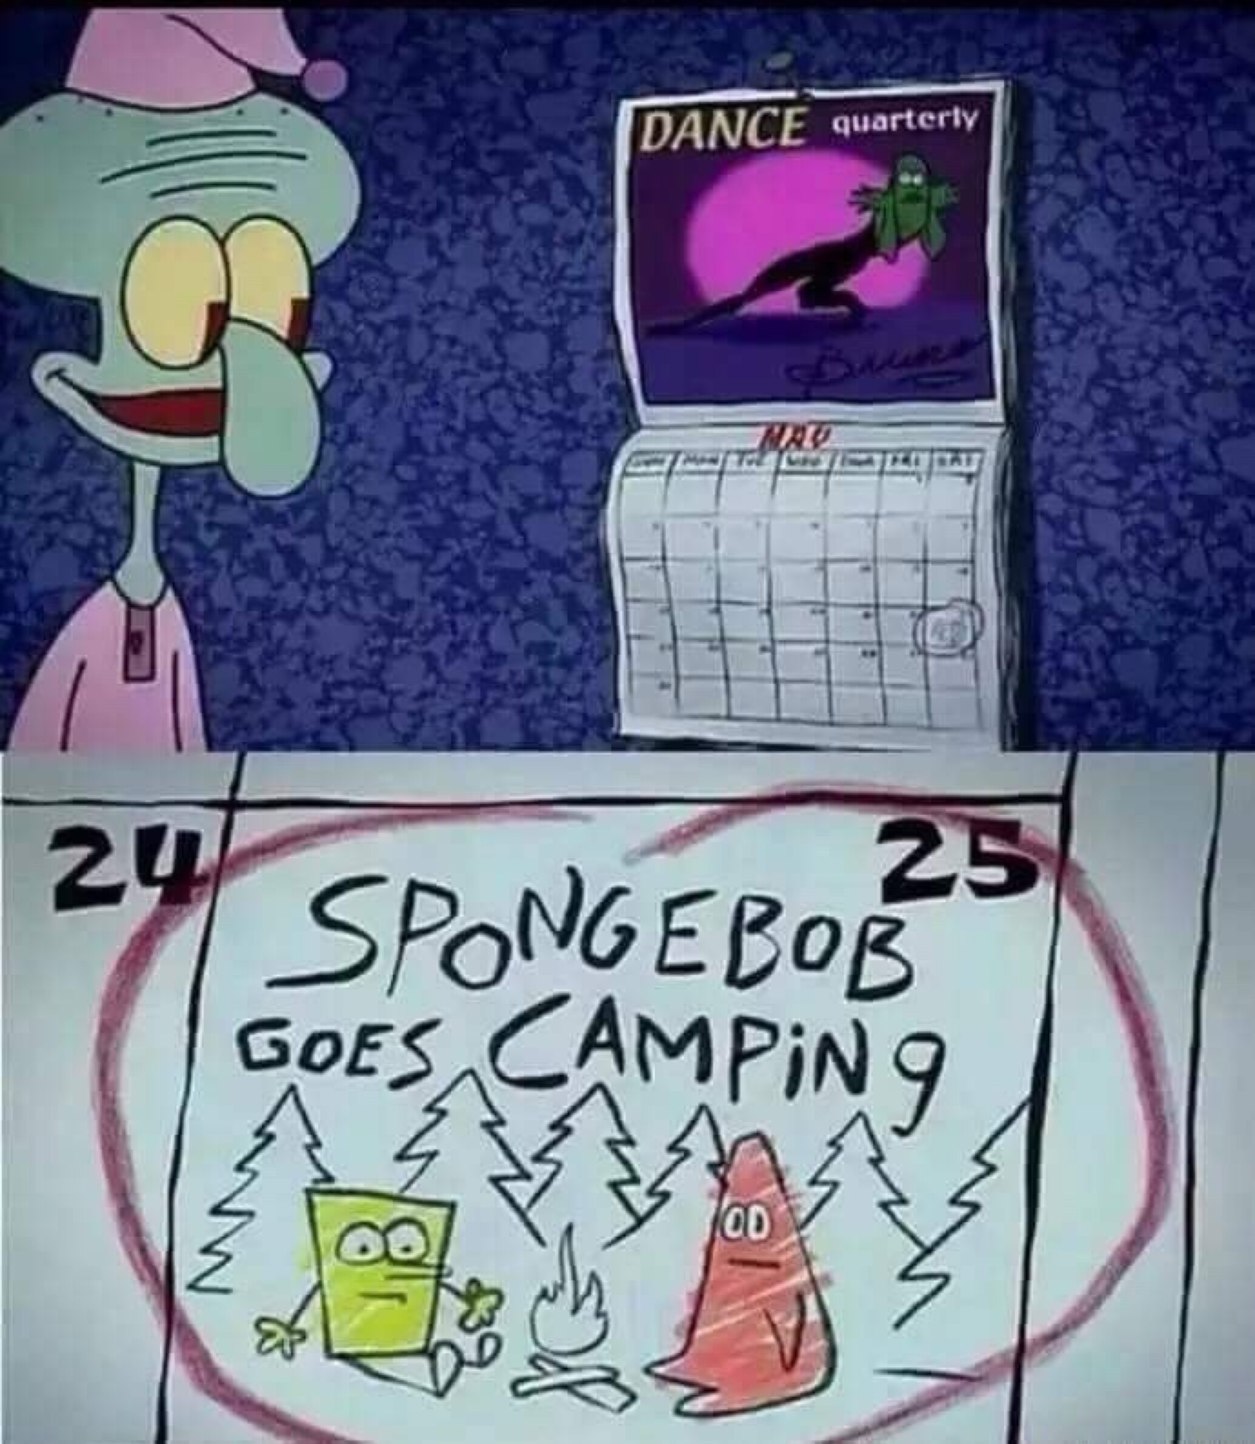 Today spongebob goes camping (repost yes but the person uploaded it on the wrong day) - meme